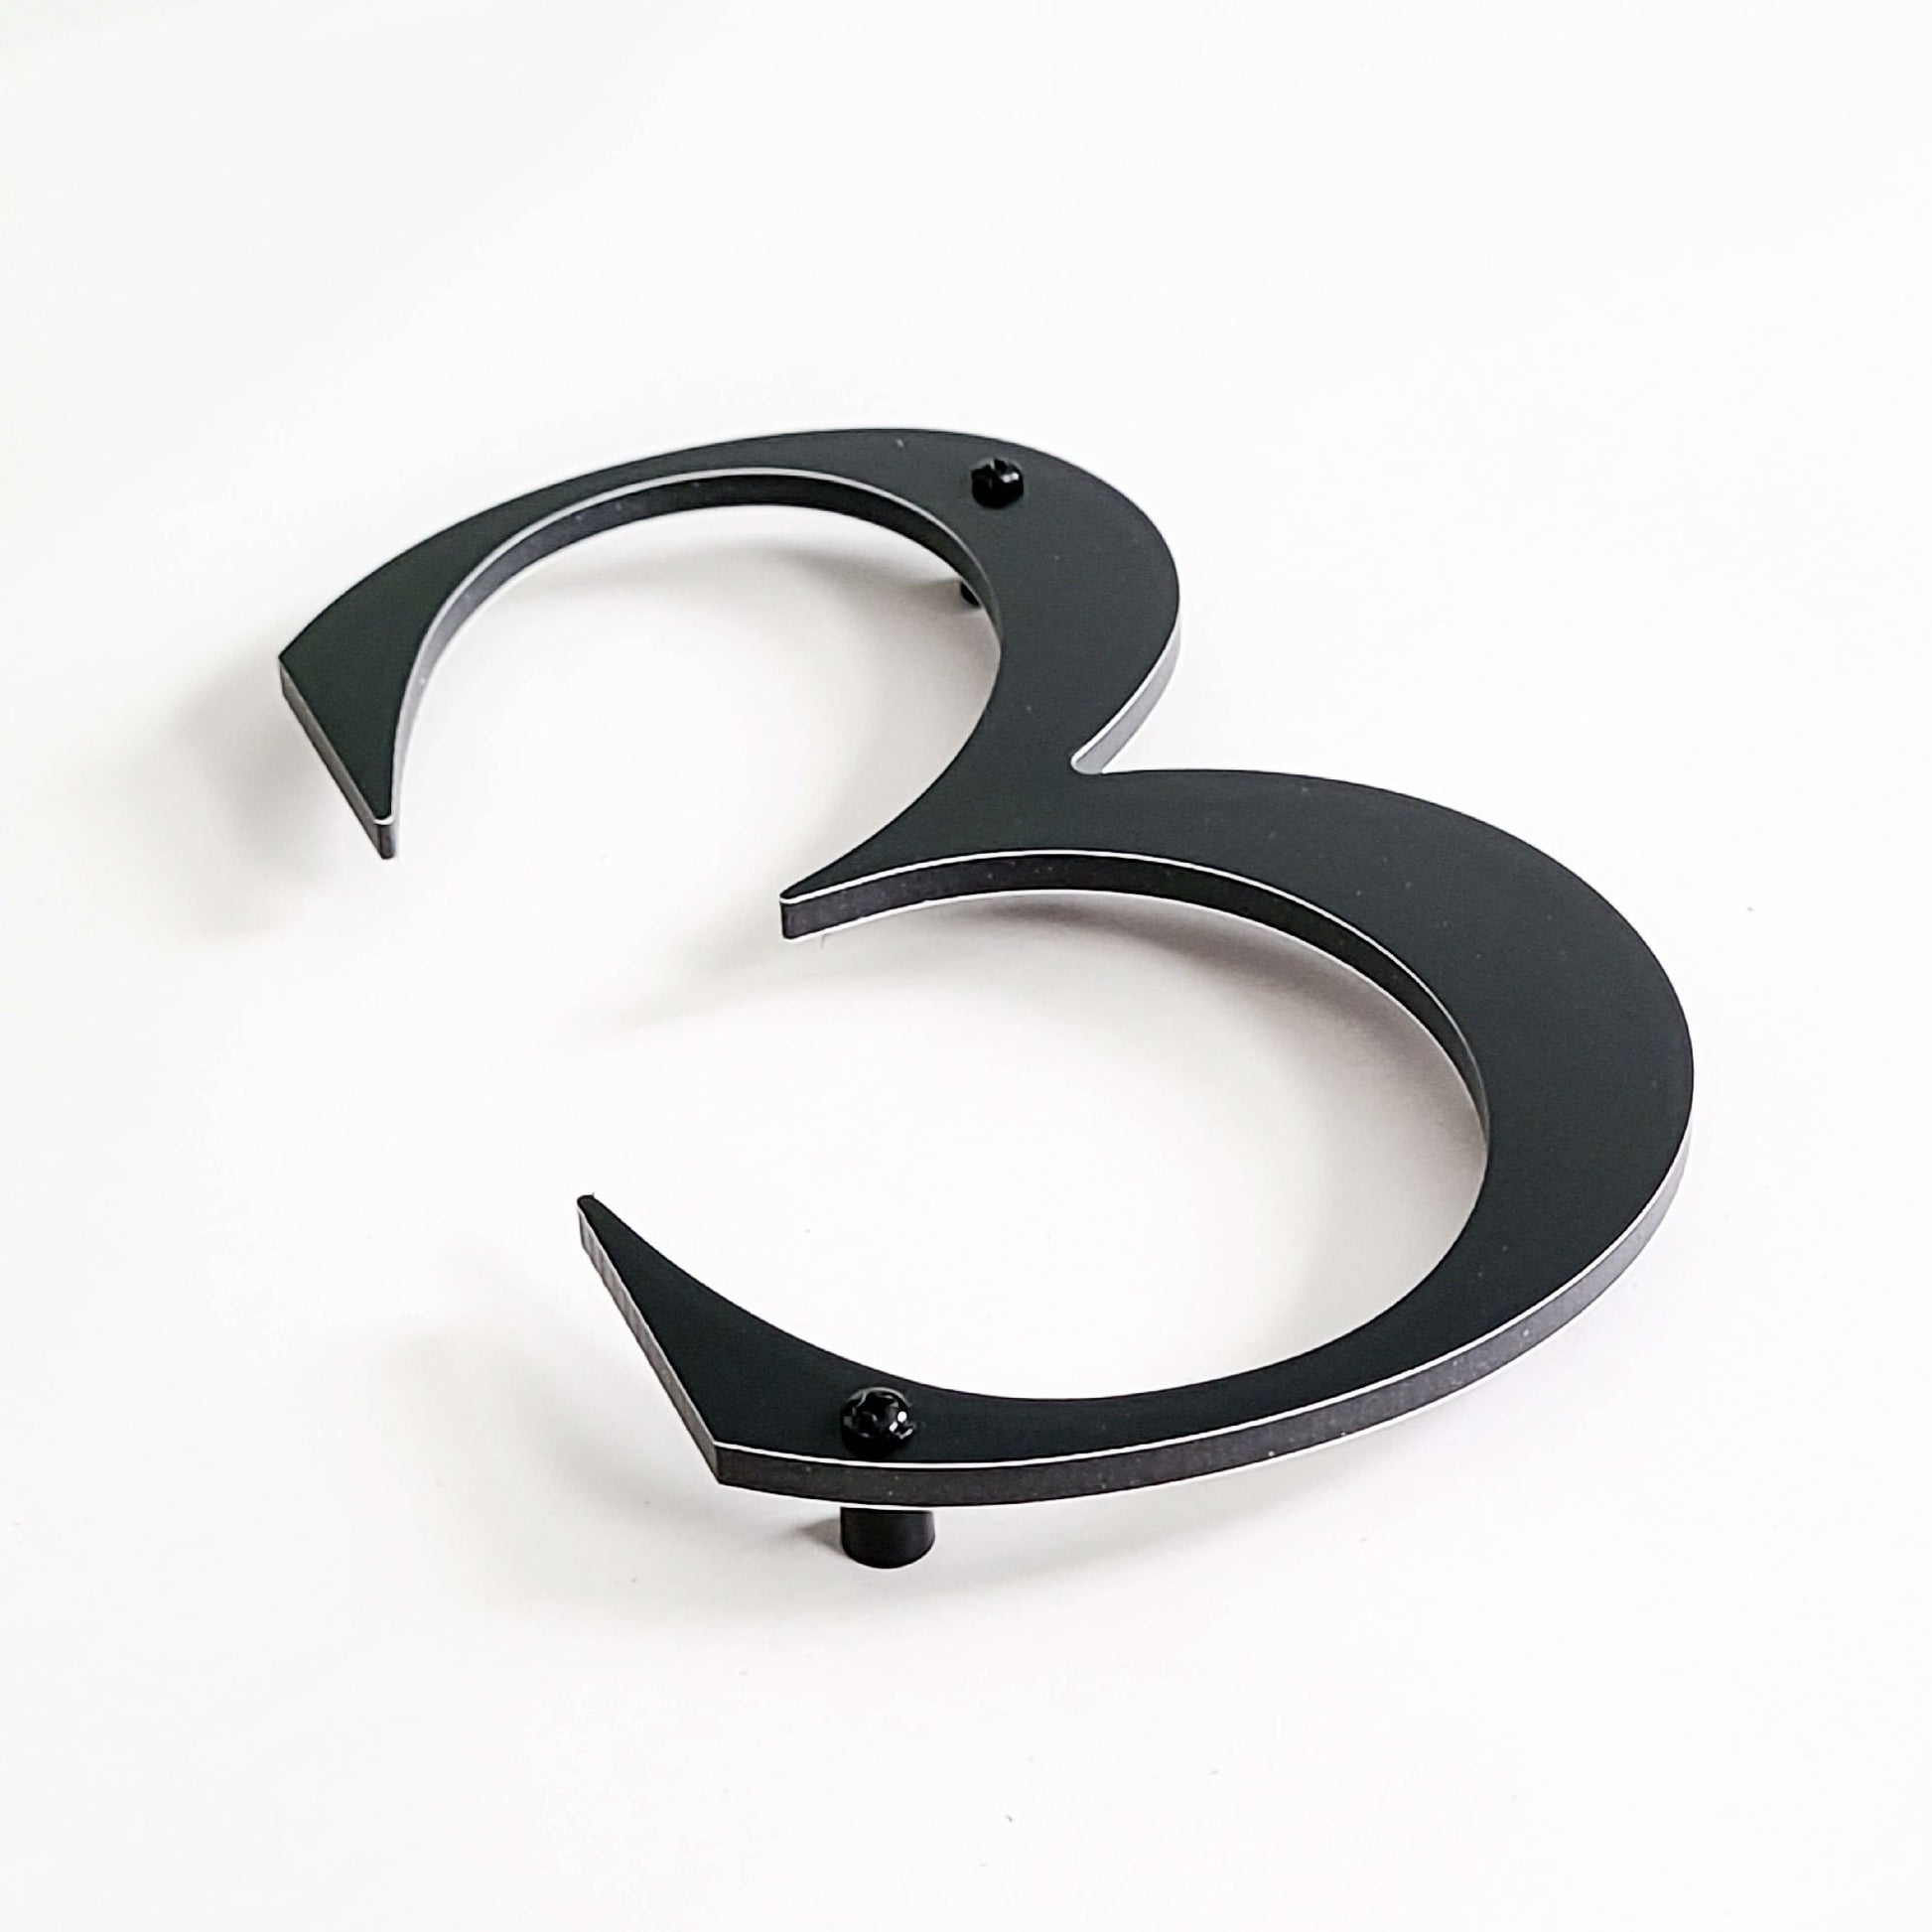 ROMAN SERIF house numbers showing standoffs and spacers for floating look